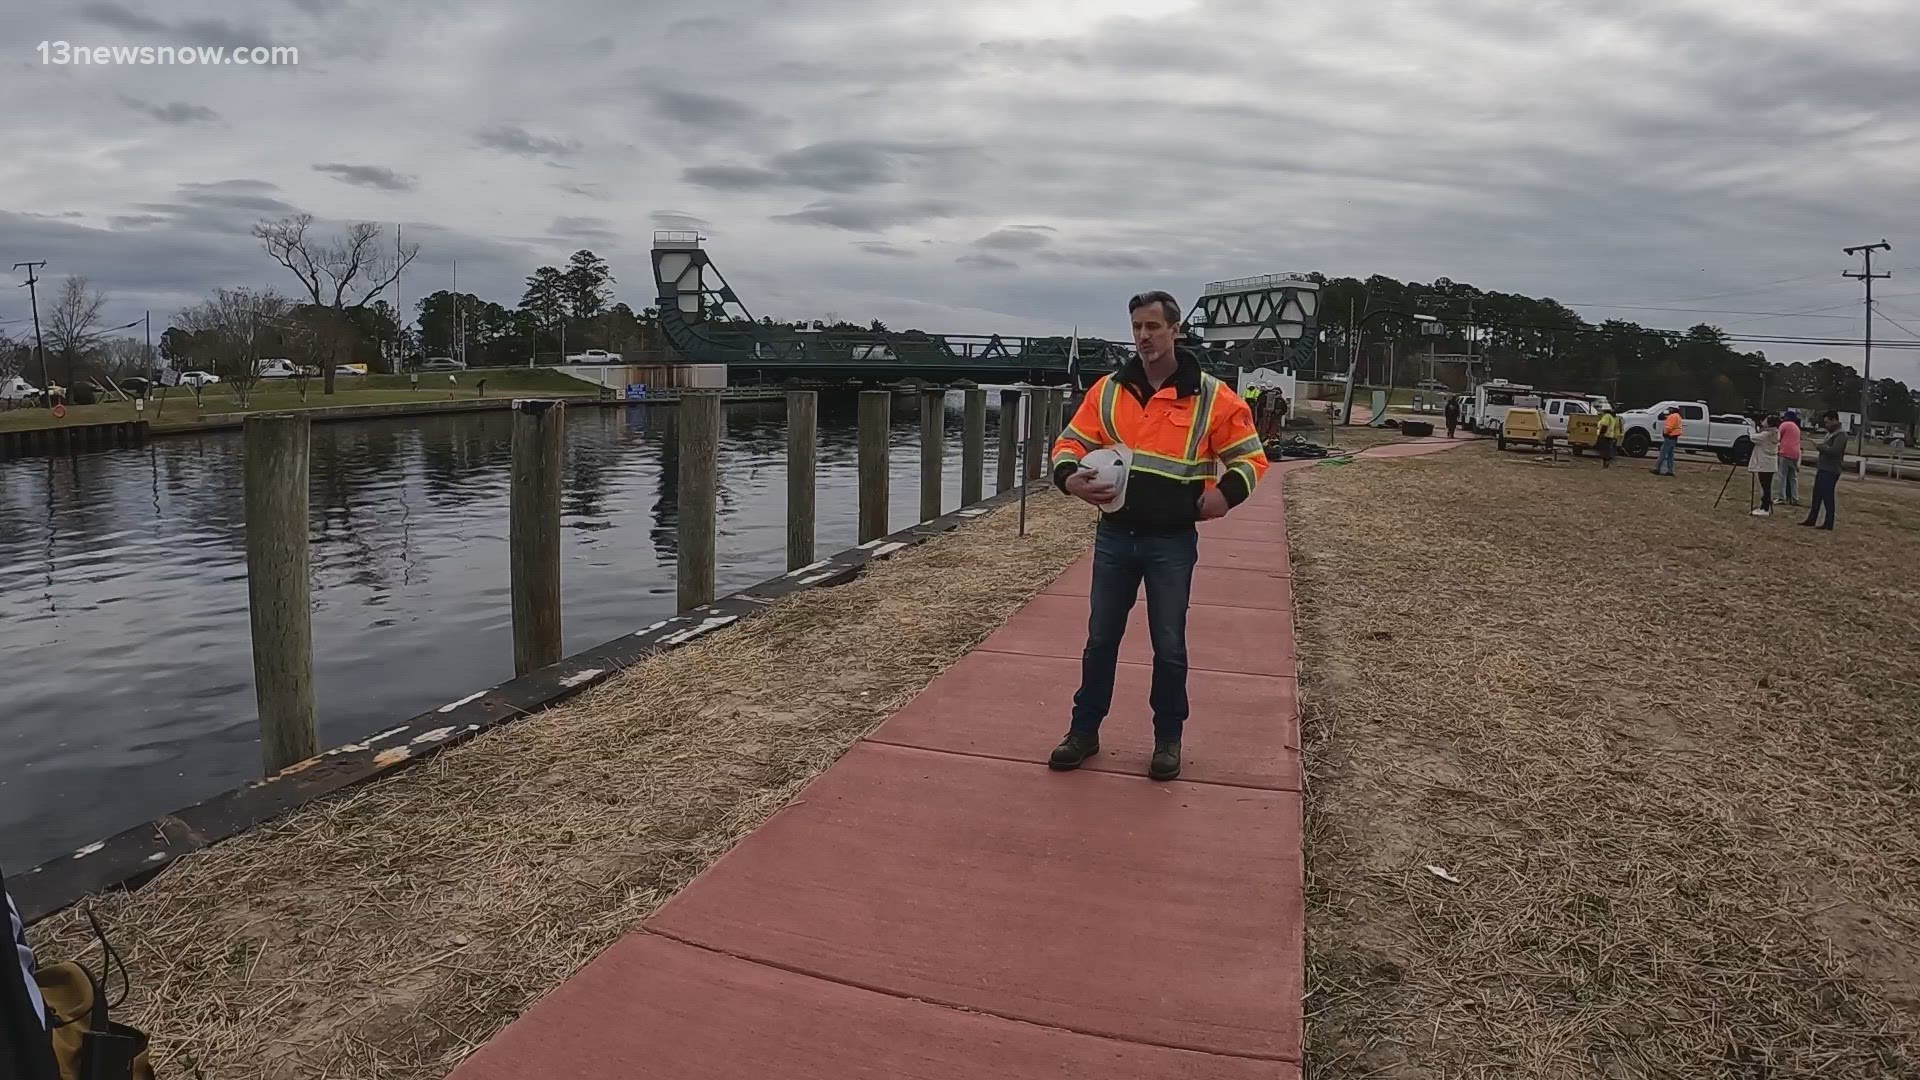 A fix is underway after an underwater sewage spill in Chesapeake. Alex Littlehales has new details on the latest efforts to clean up the waters around Great Bridge.